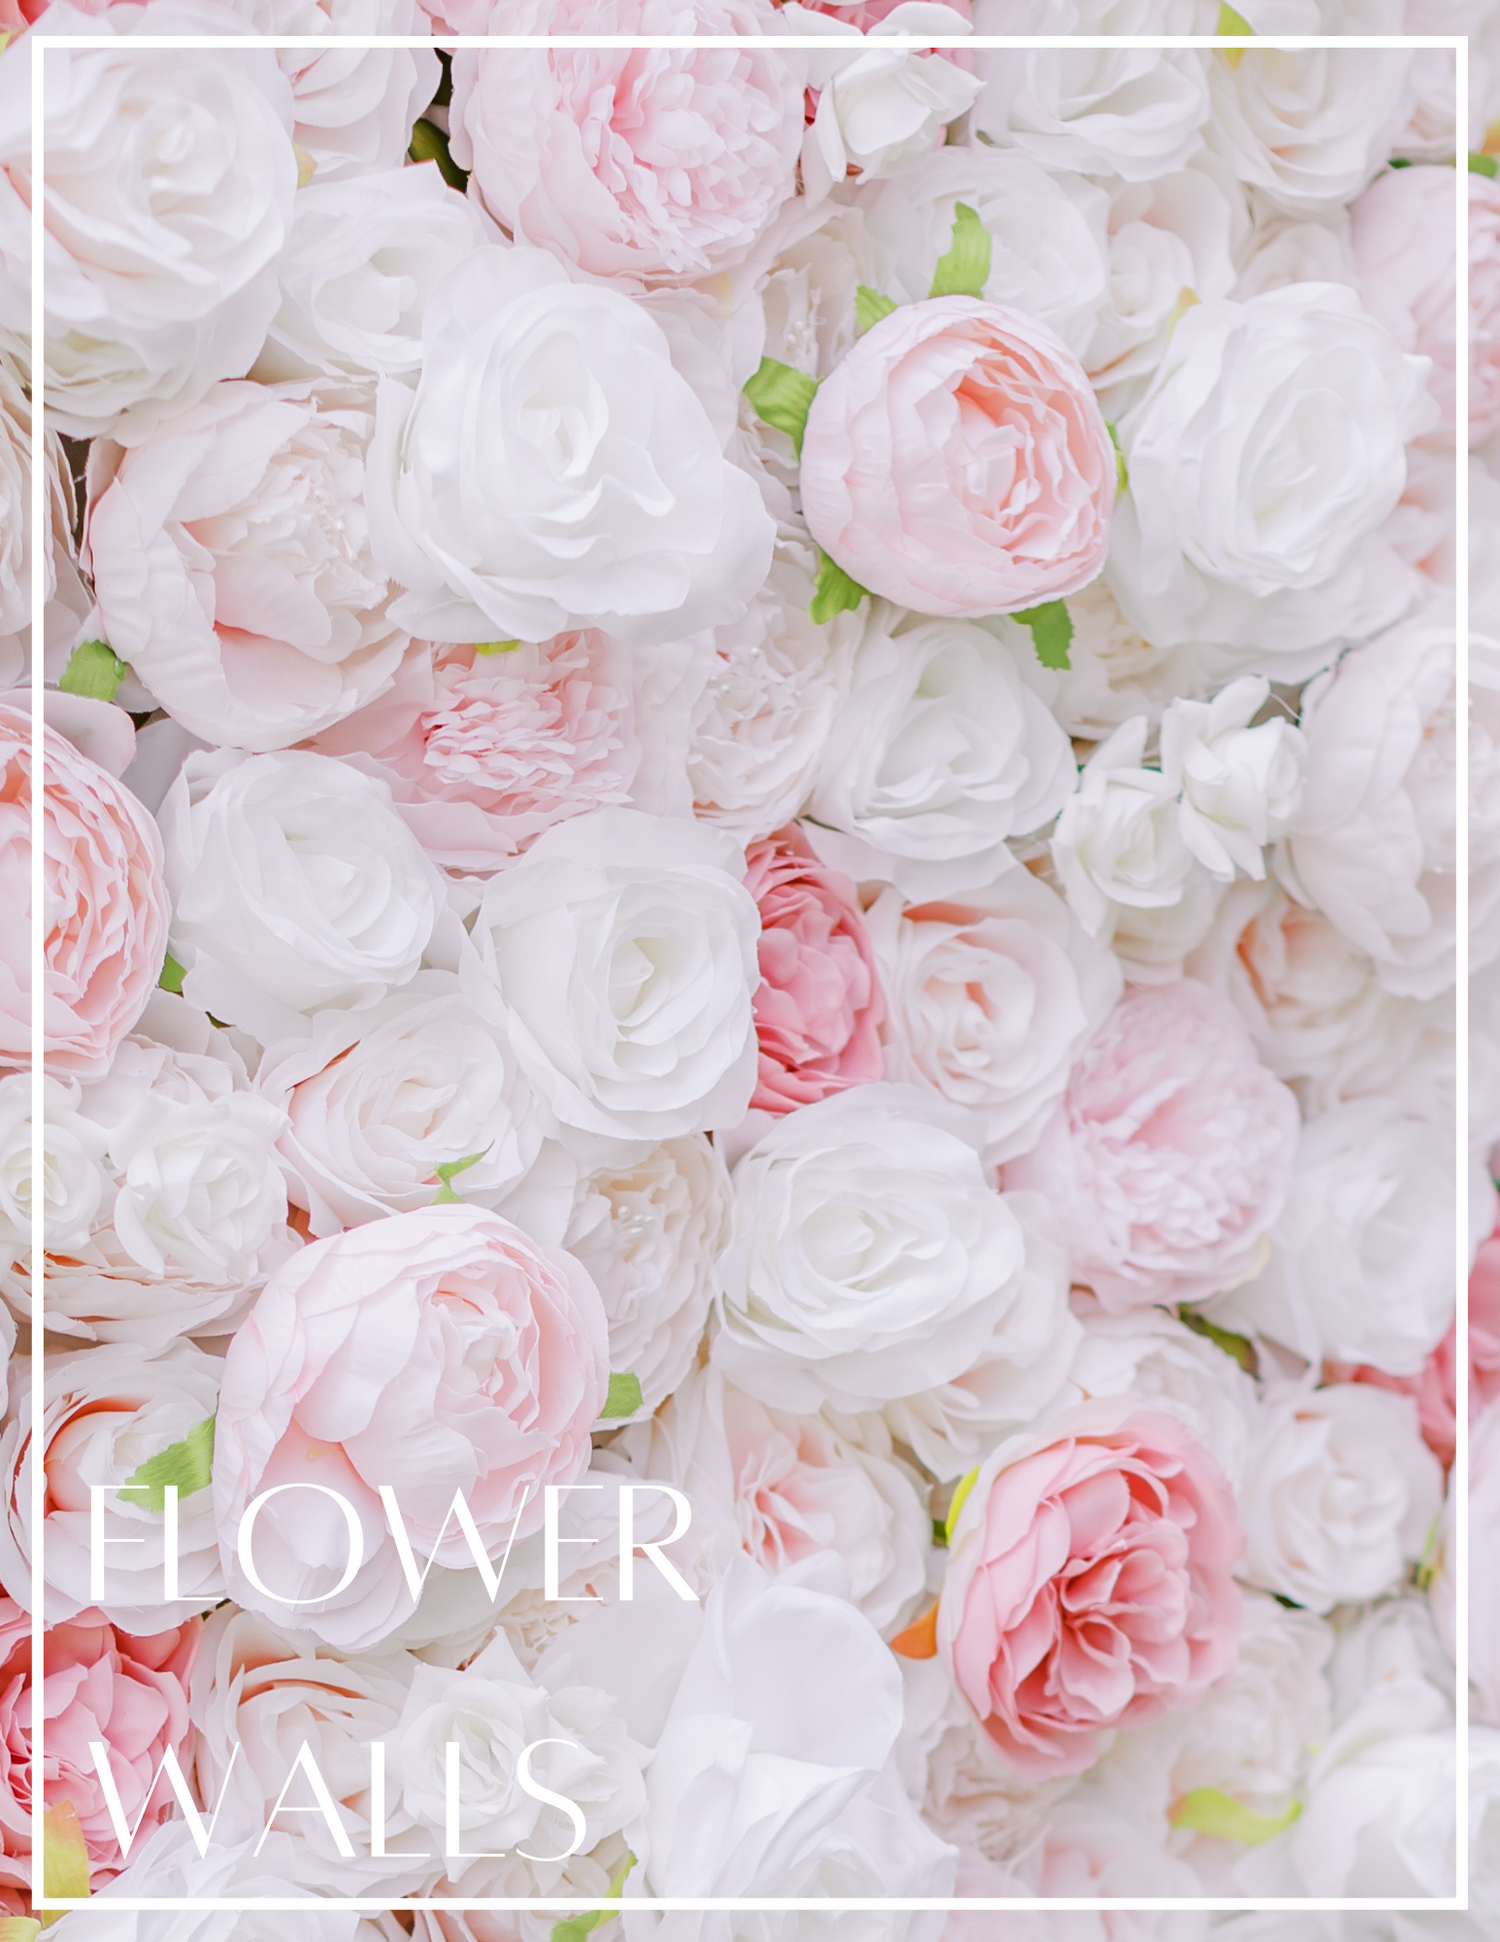 Rent Our Lux Flower Walls for Your Next Special Occasion